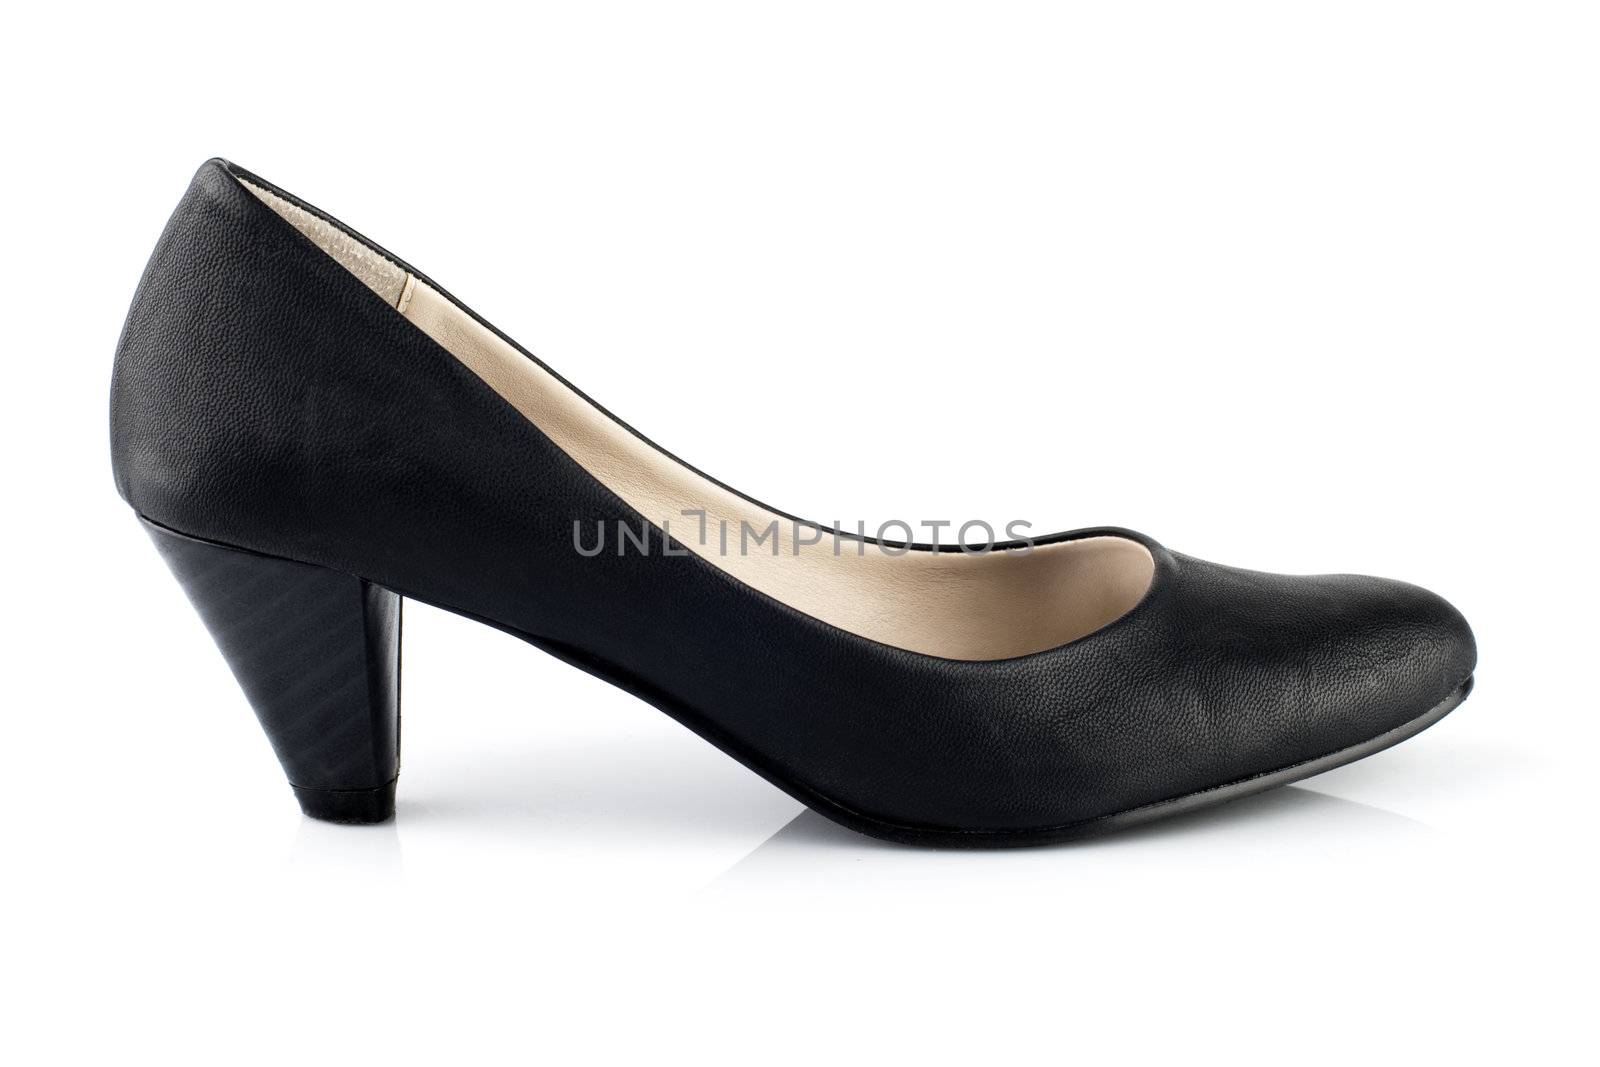 Black leather high heels pumps on white background